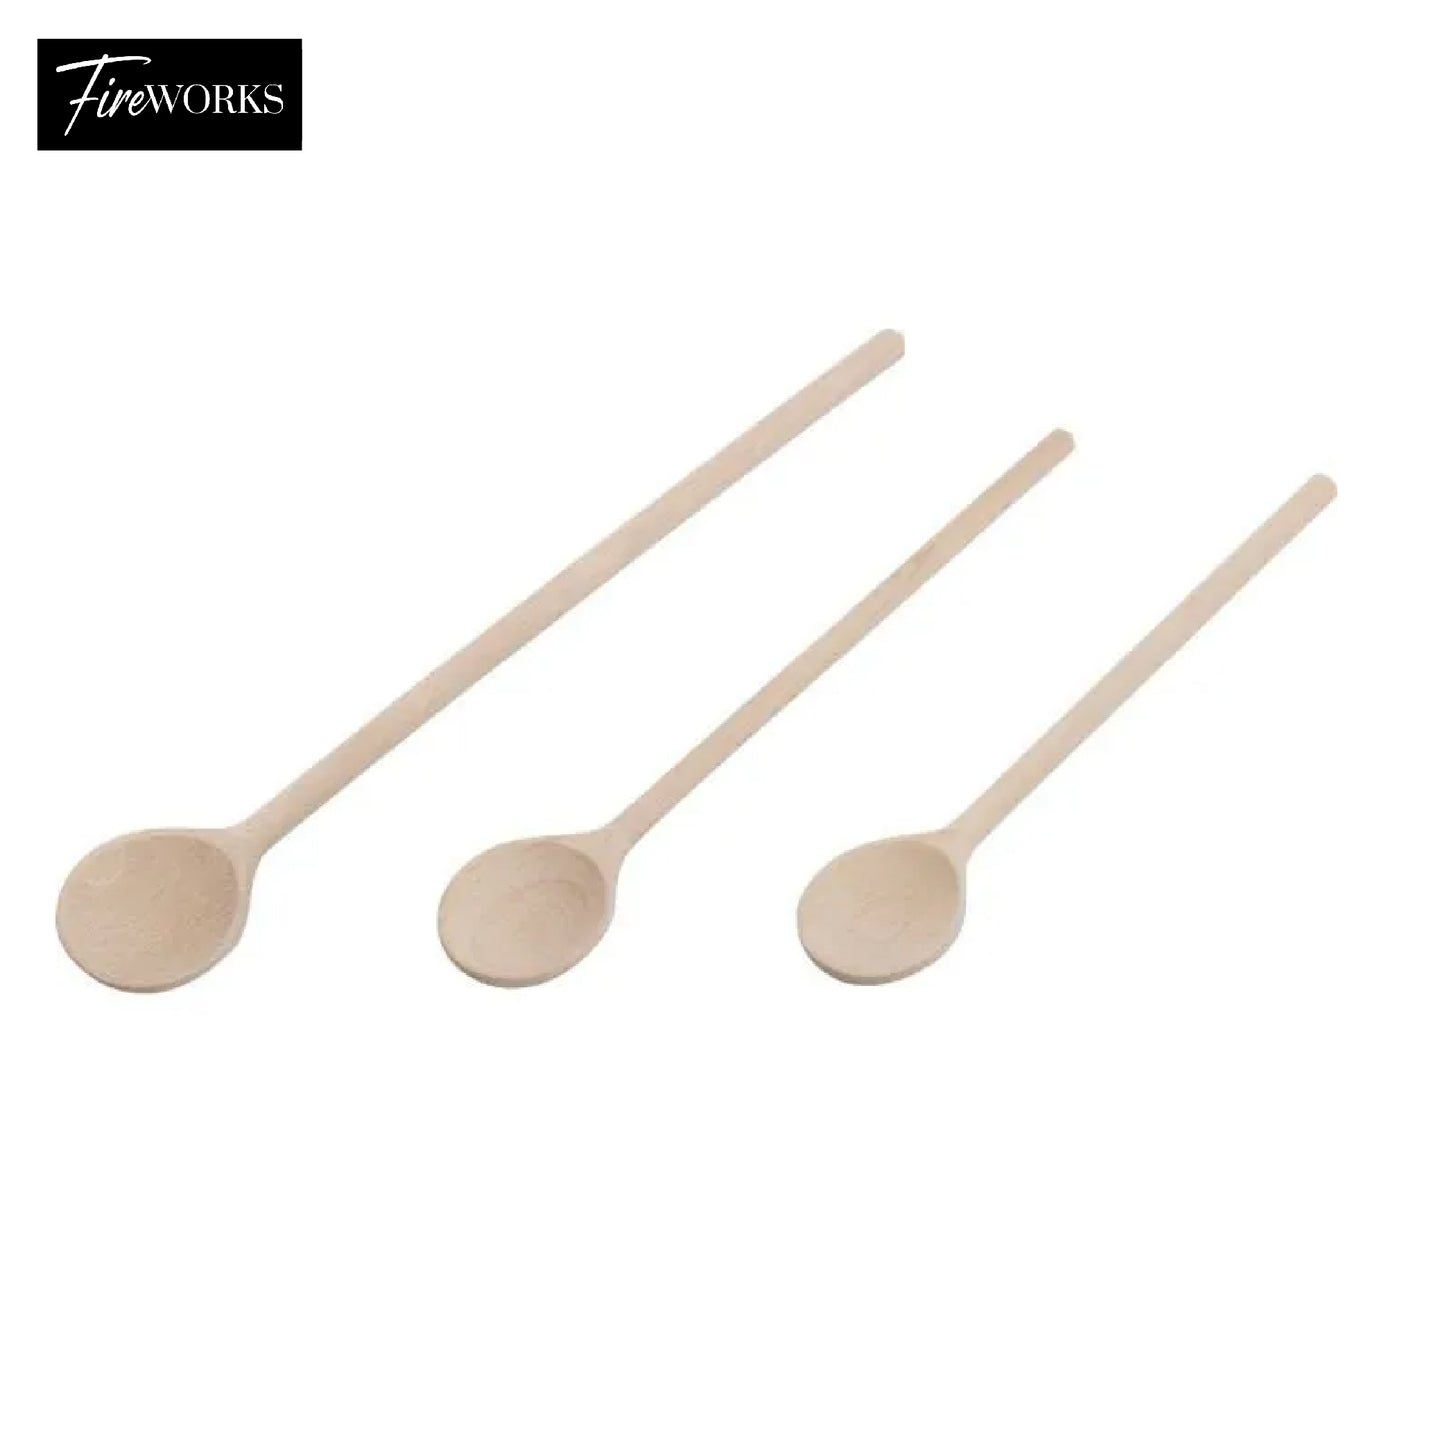 3 Mixing Spoons - 13822270